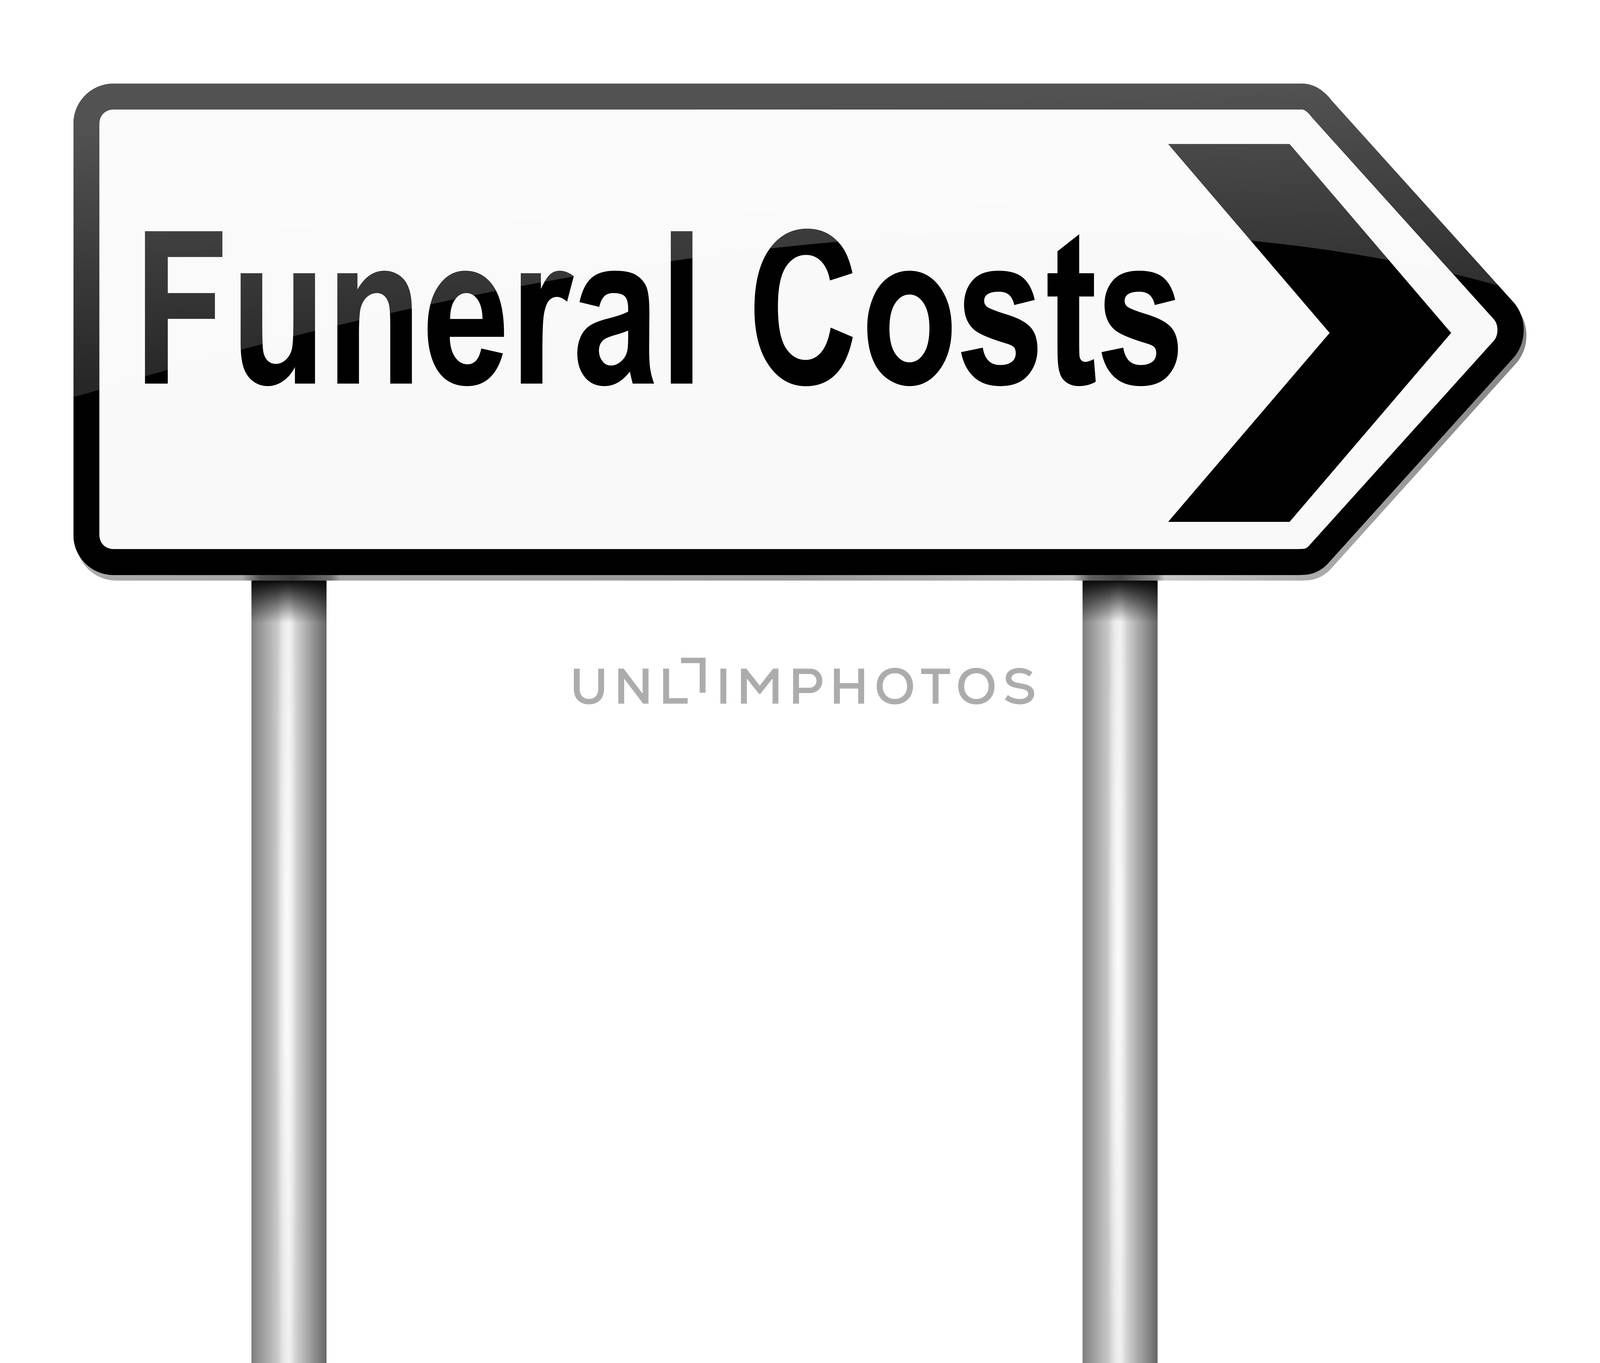 Funeral costs concept. by 72soul